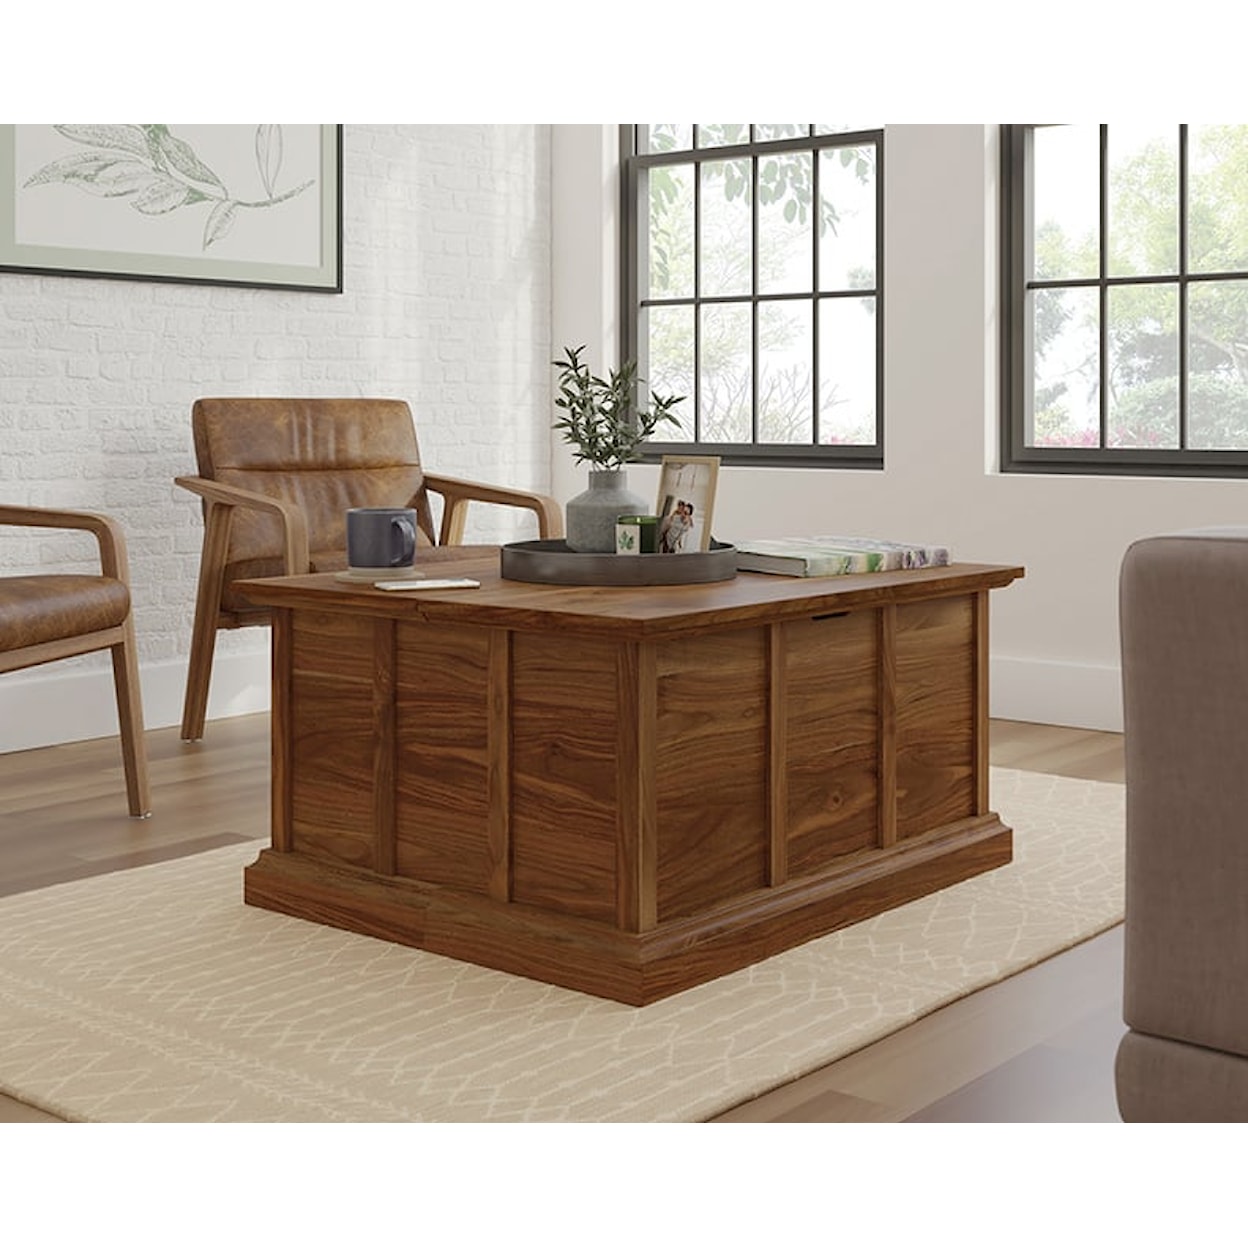 Sauder Cottage Road Coffee Table with Two Storage Sections